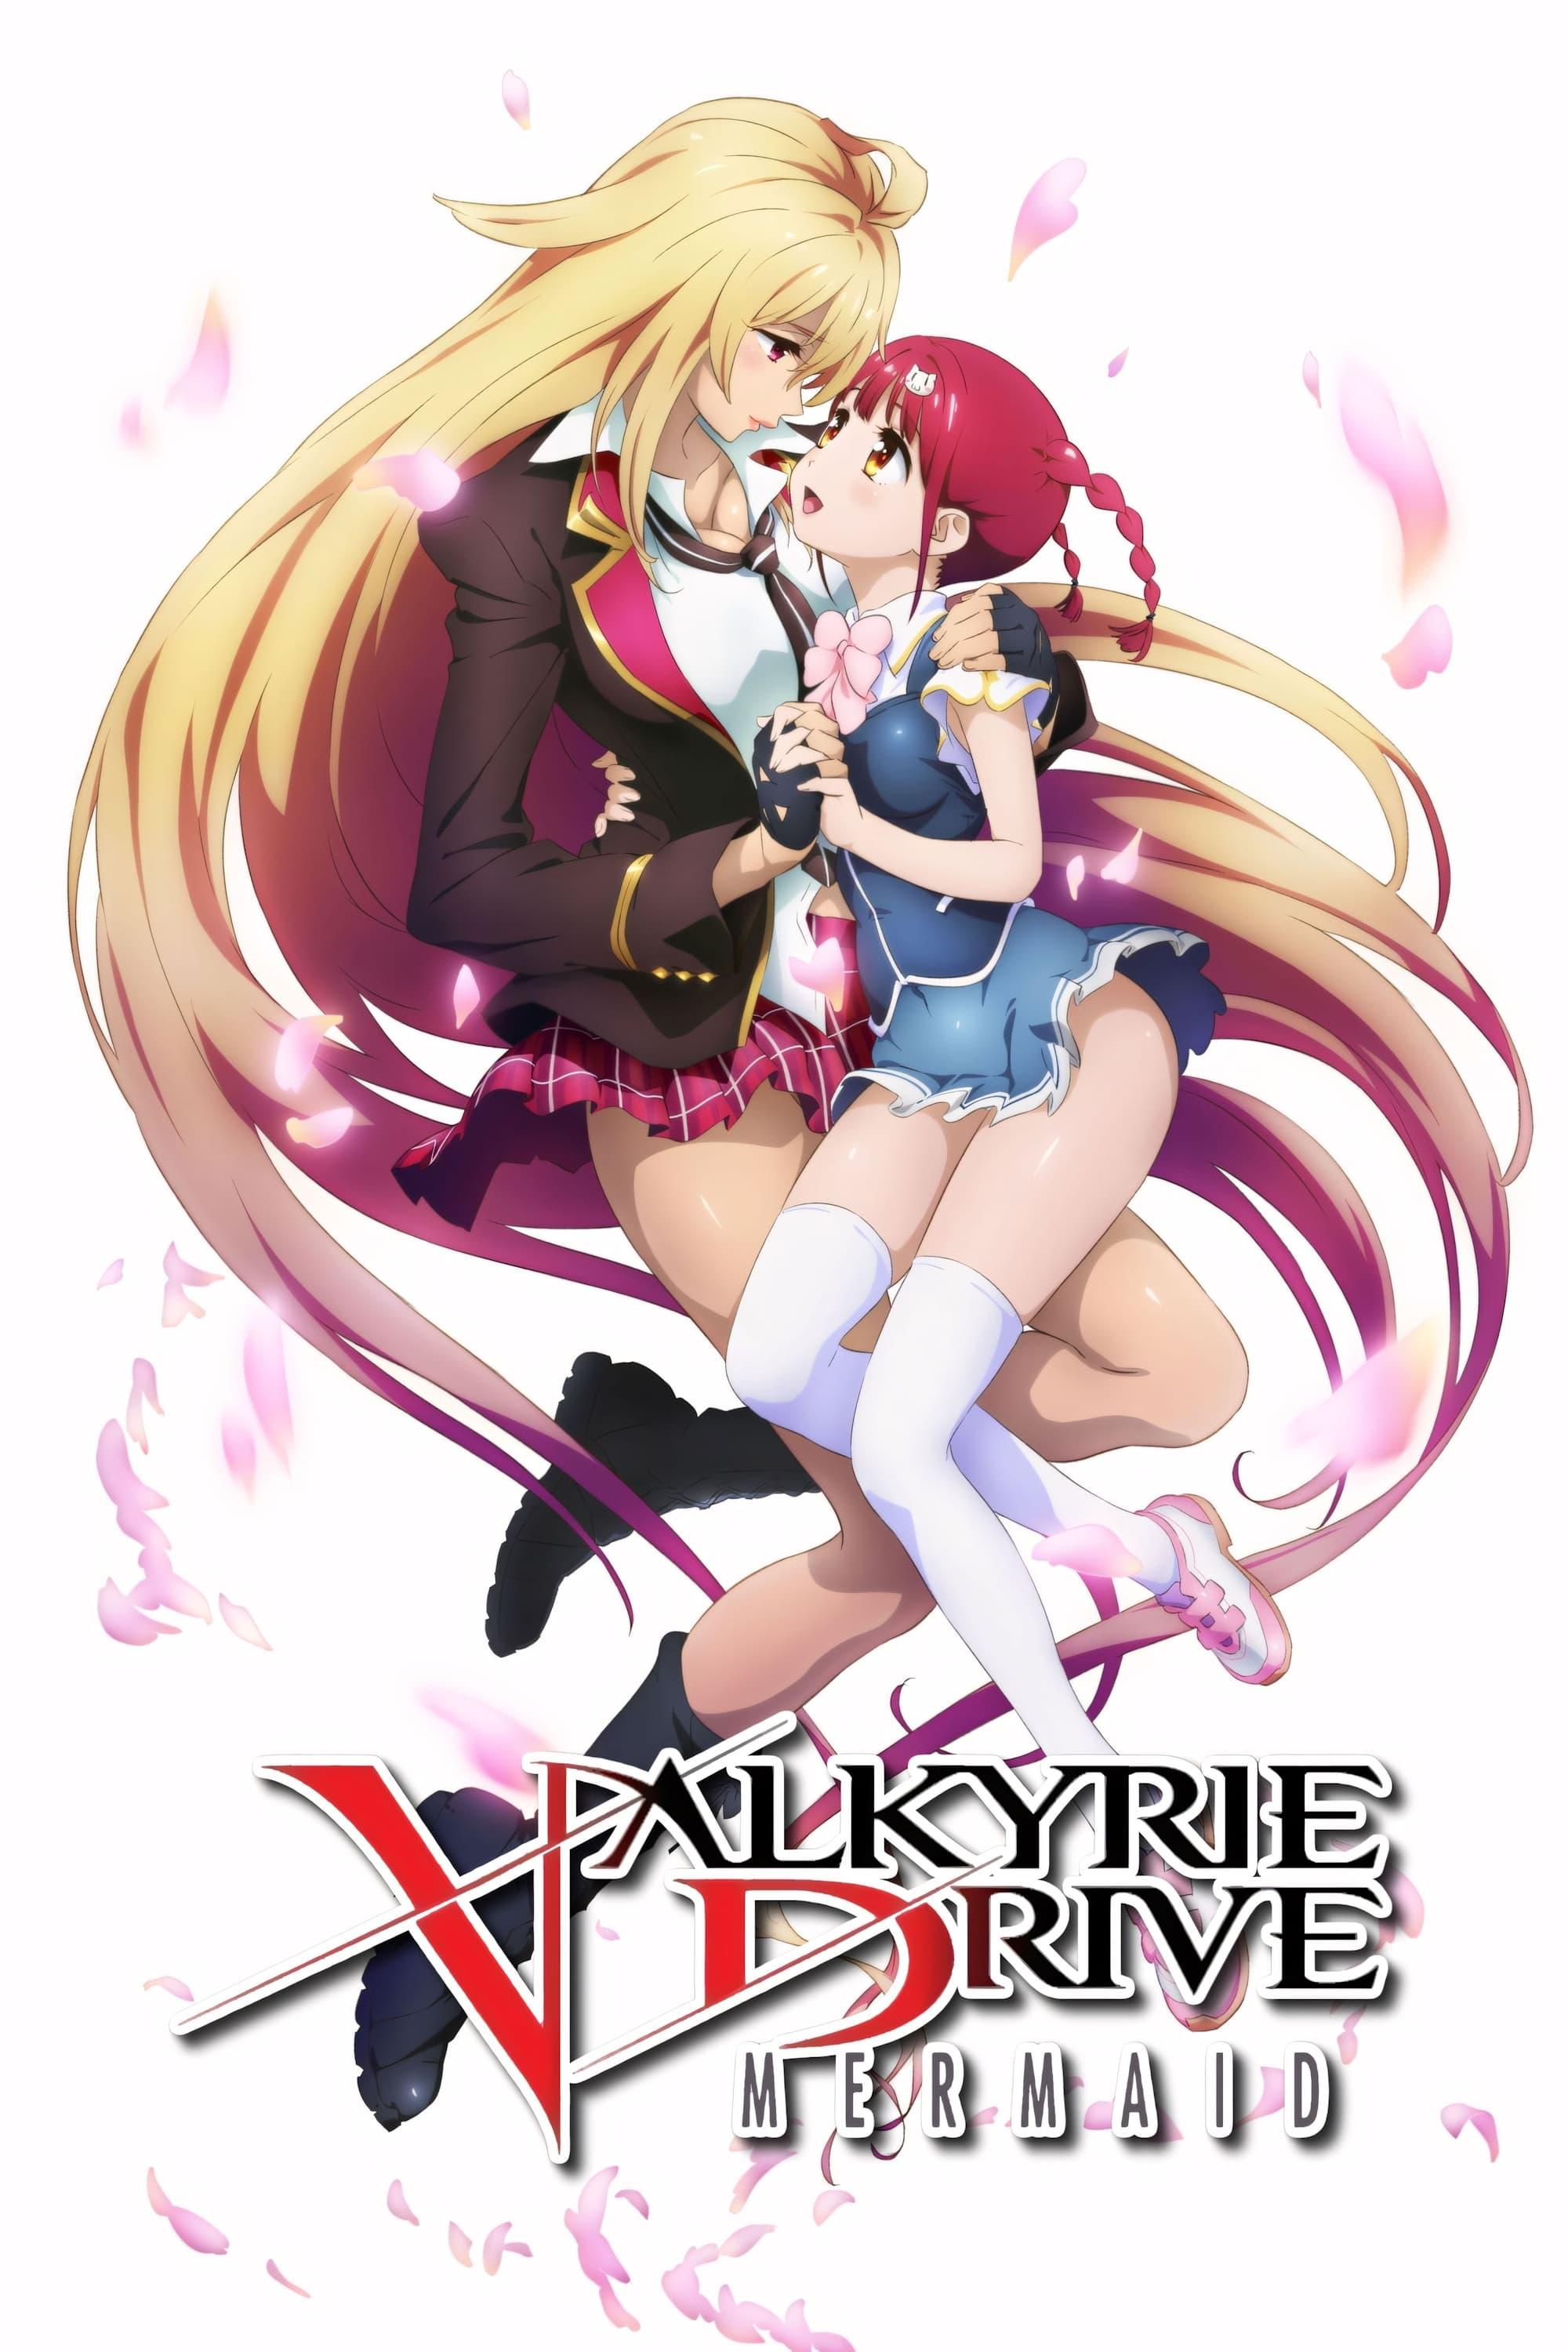 Valkyrie Drive: Mermaid poster